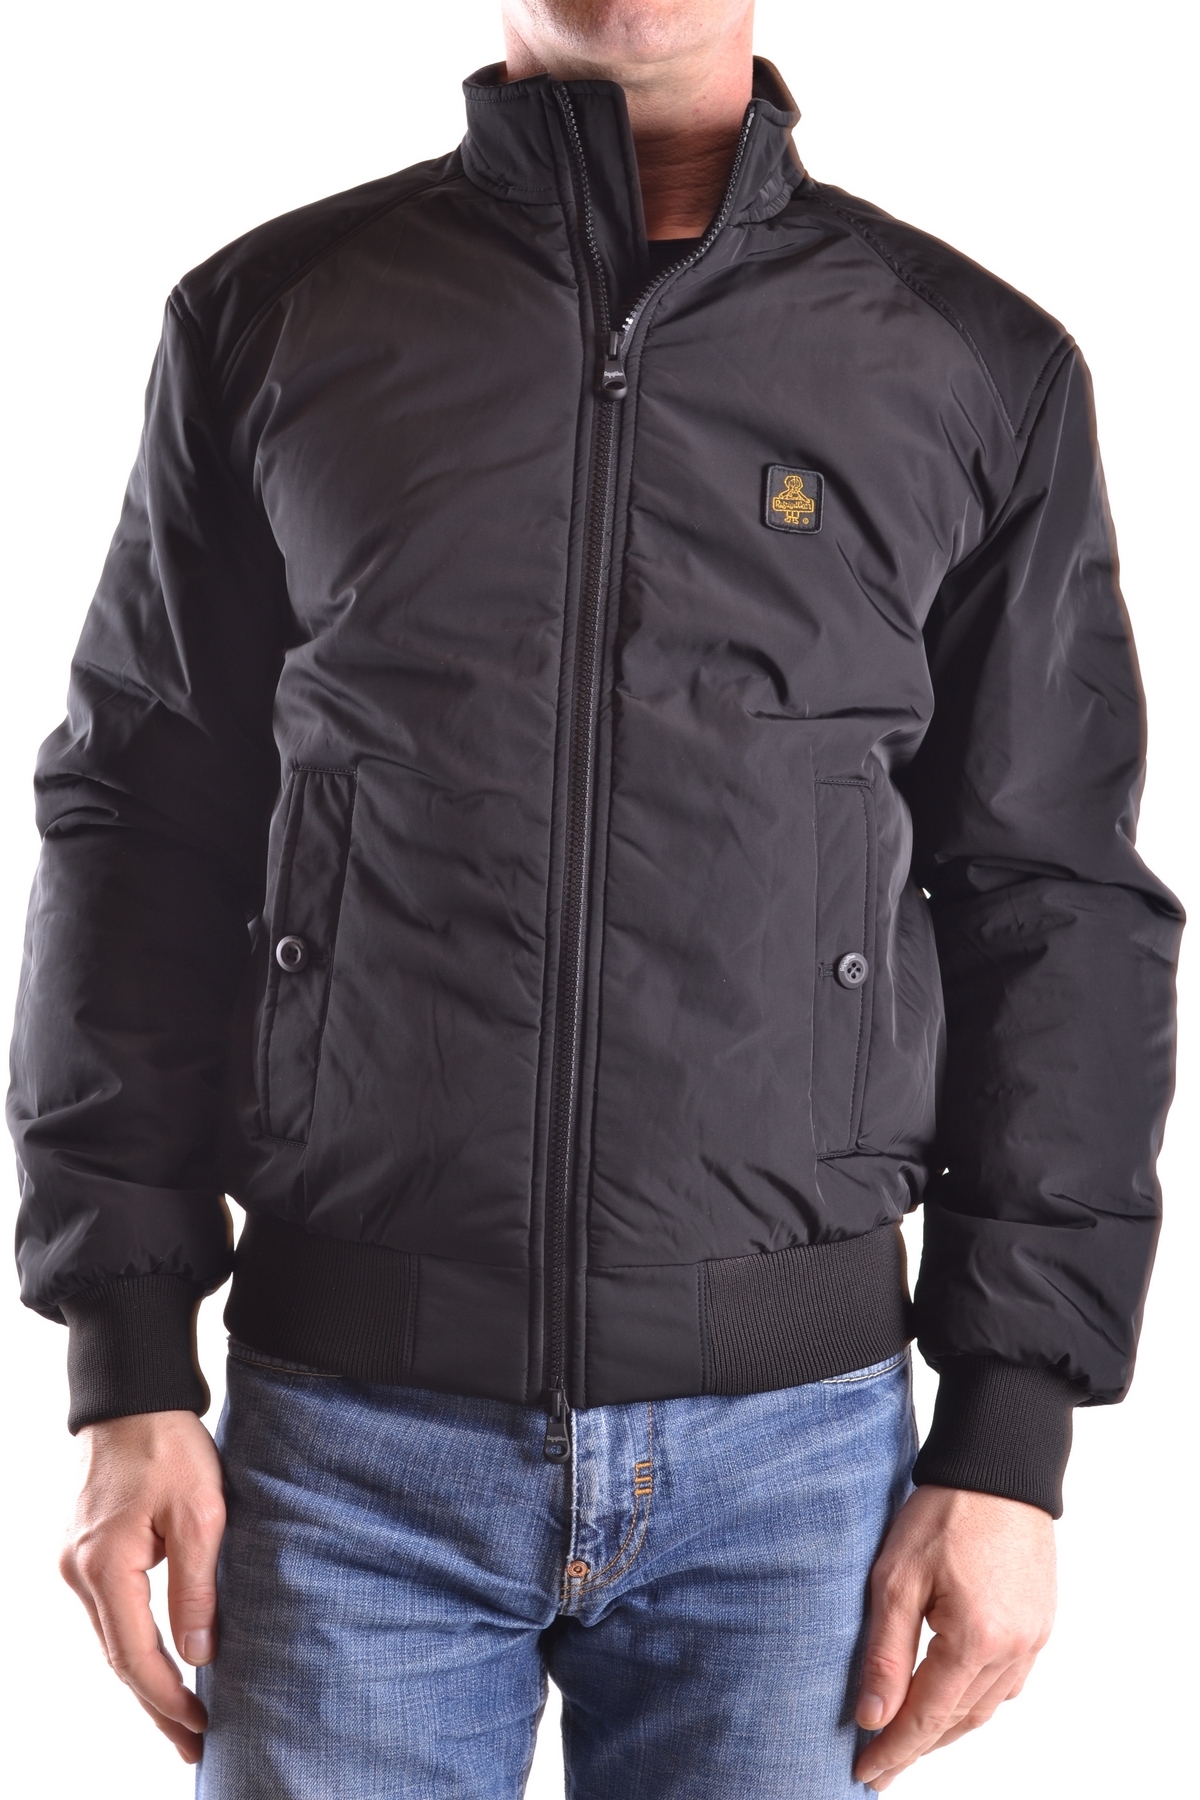 past glory Ass Giubbino RefrigiWear NEW ROOTED JACKET NN2716 - Outlet Bicocca